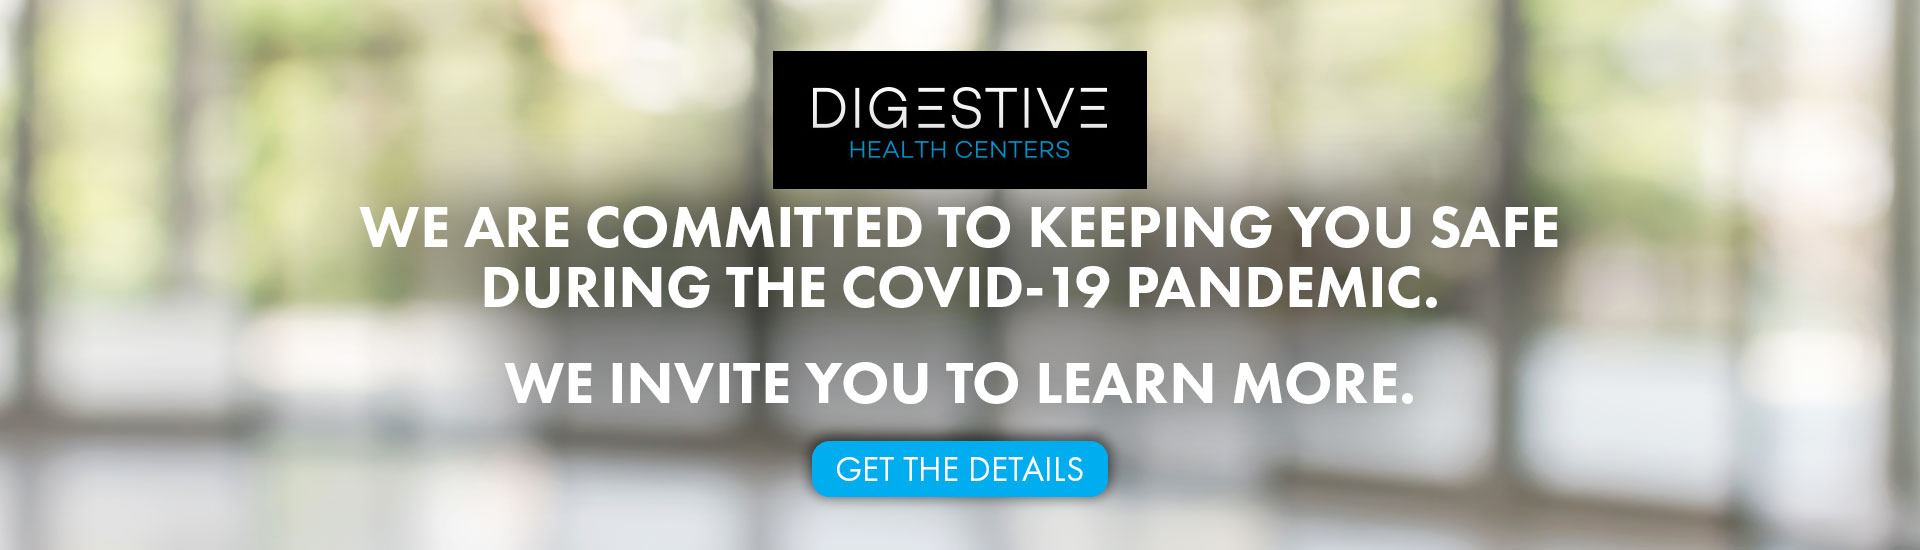 Digestive Health Centers - Committed to Keeping You Safe During the COVID-19 Pandemic